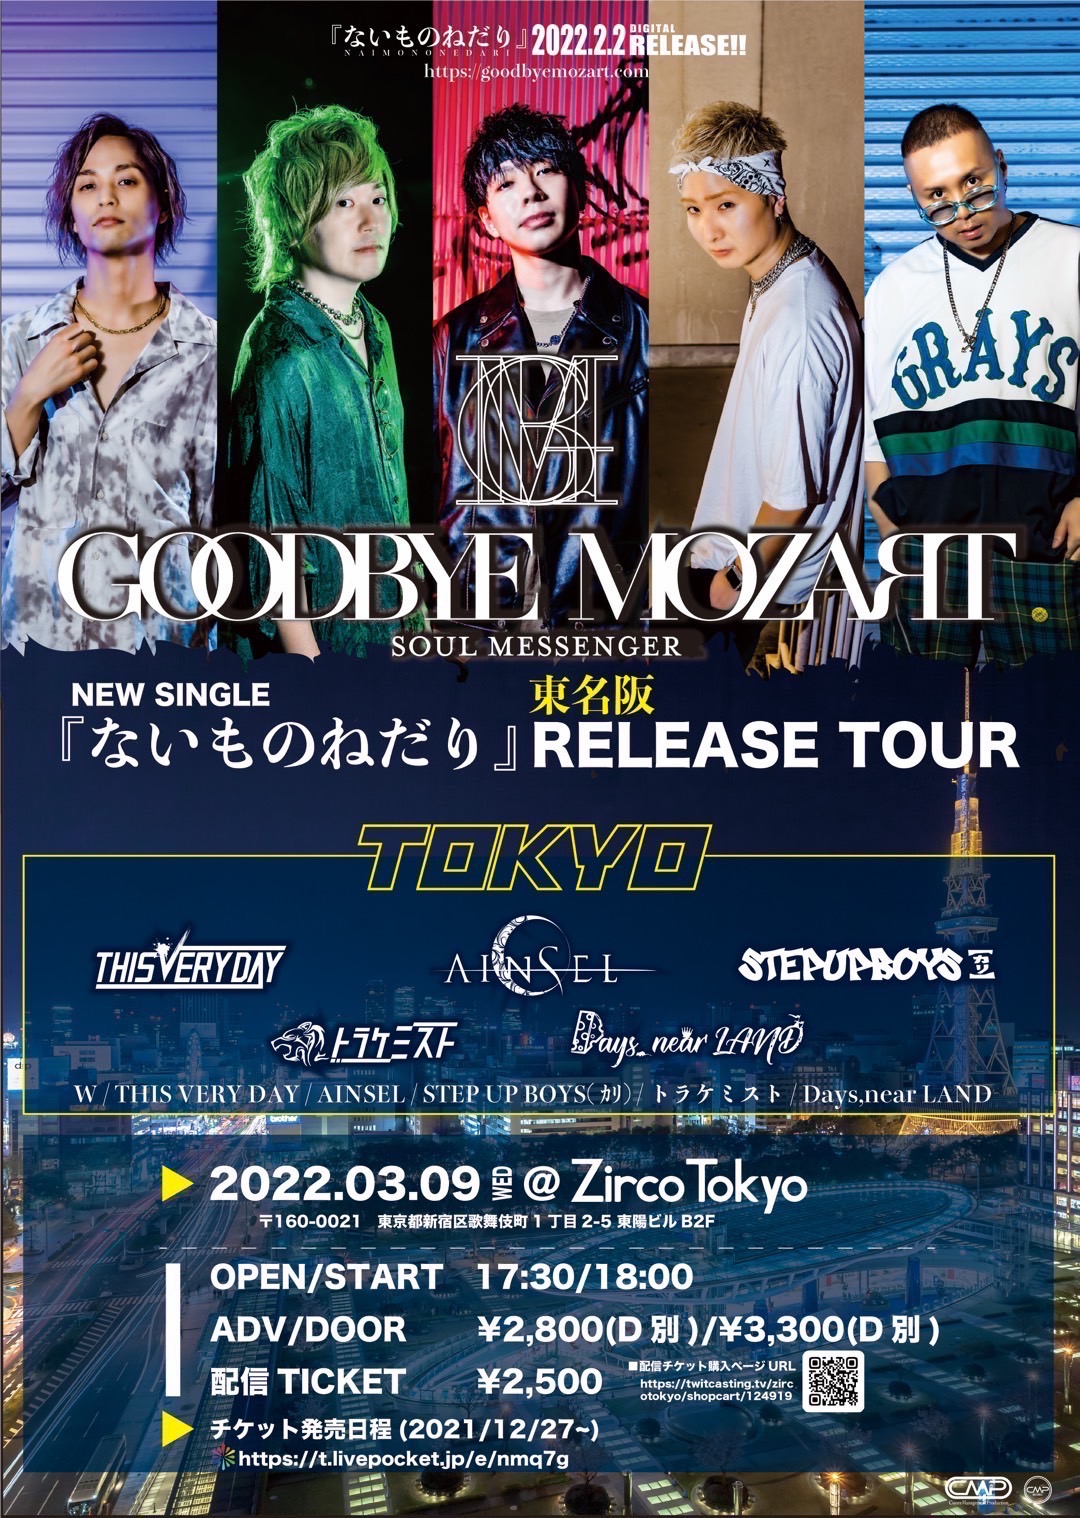 GOODBYE MOZART NEW SINGLE「ないものねだり」RELEASE TOUR in TOKYO